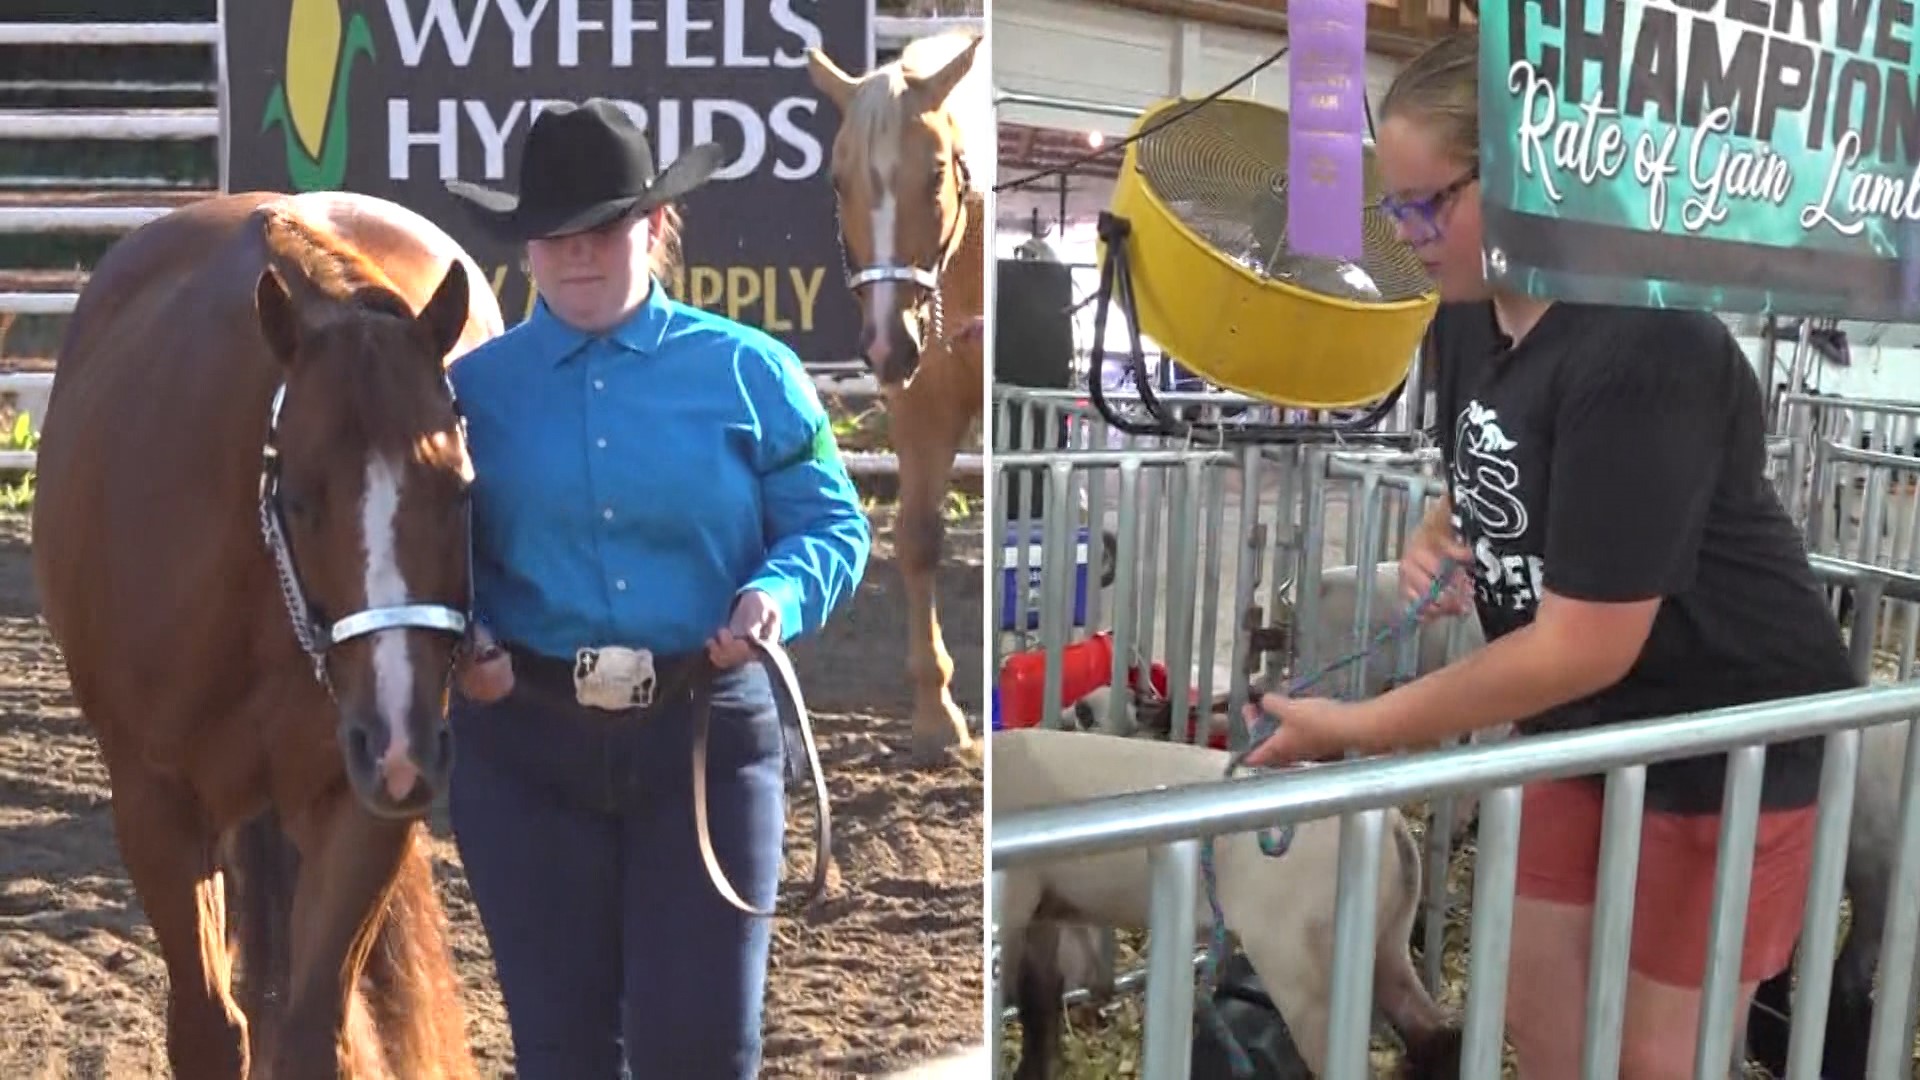 Whether it's showing sheep or riding horses, some teens from Dallas County are making their mark on the state's biggest summer celebration.